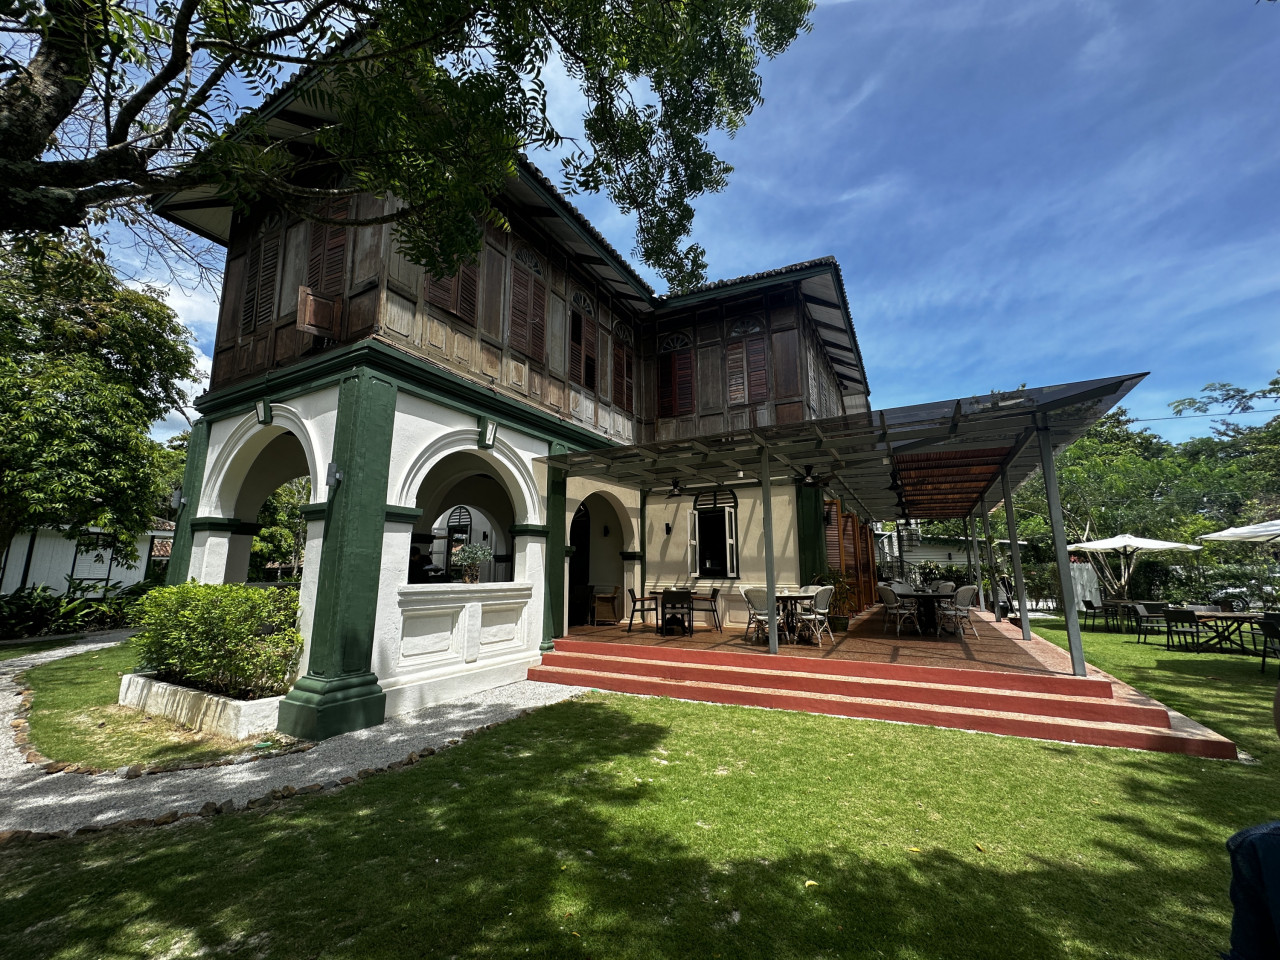 The Ipoh House’s original owners were tin miners. – Haikal Fernandez pic